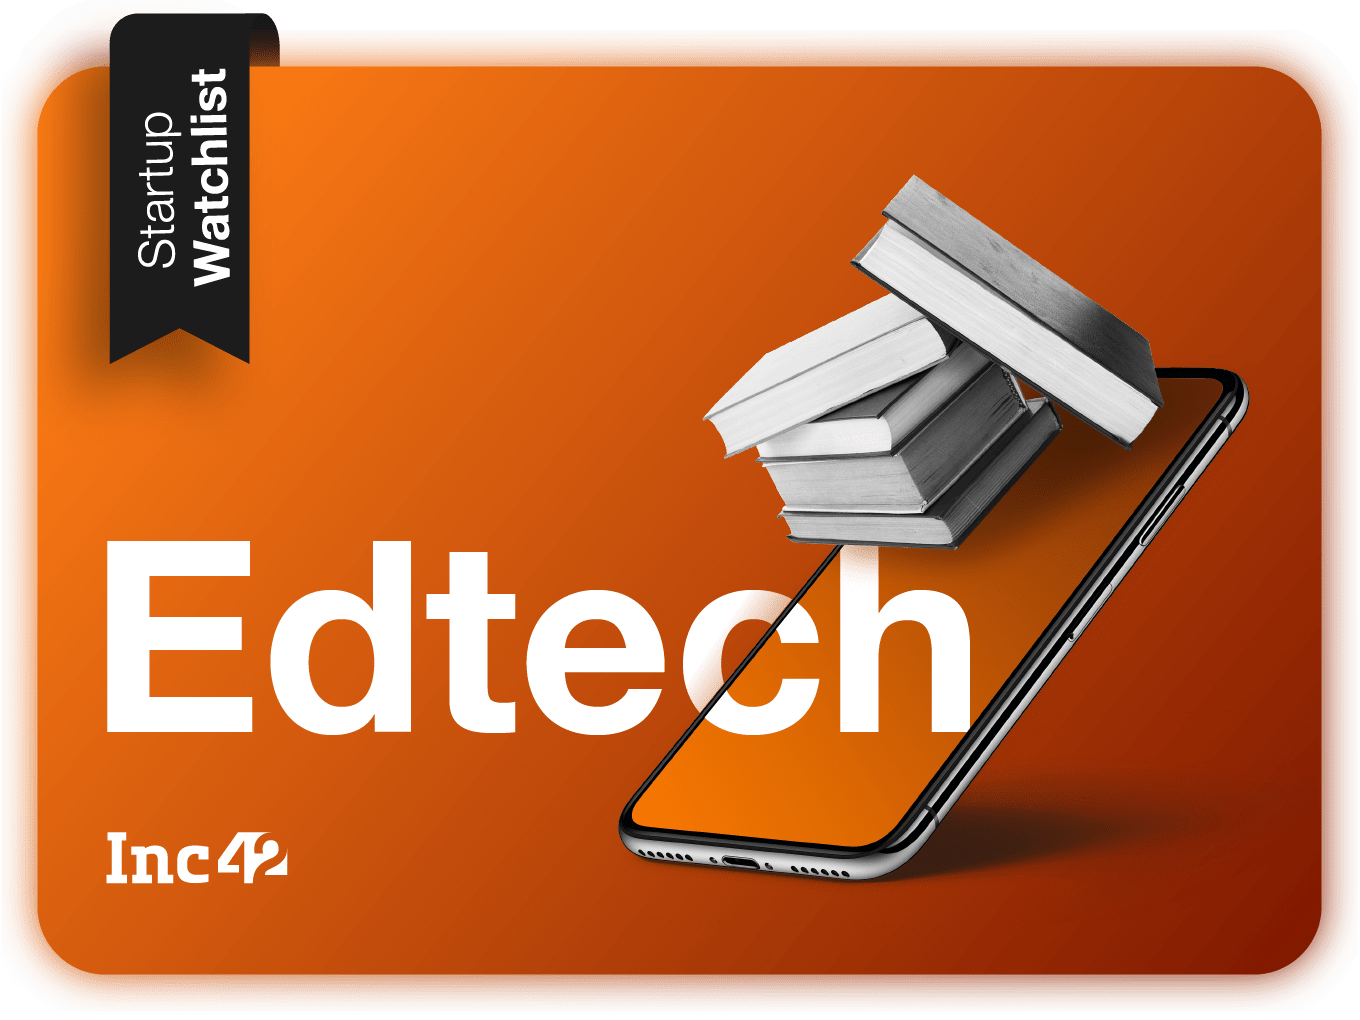 Startup Watchlist: Top Indian Edtech Startups To Look Out For In 2019